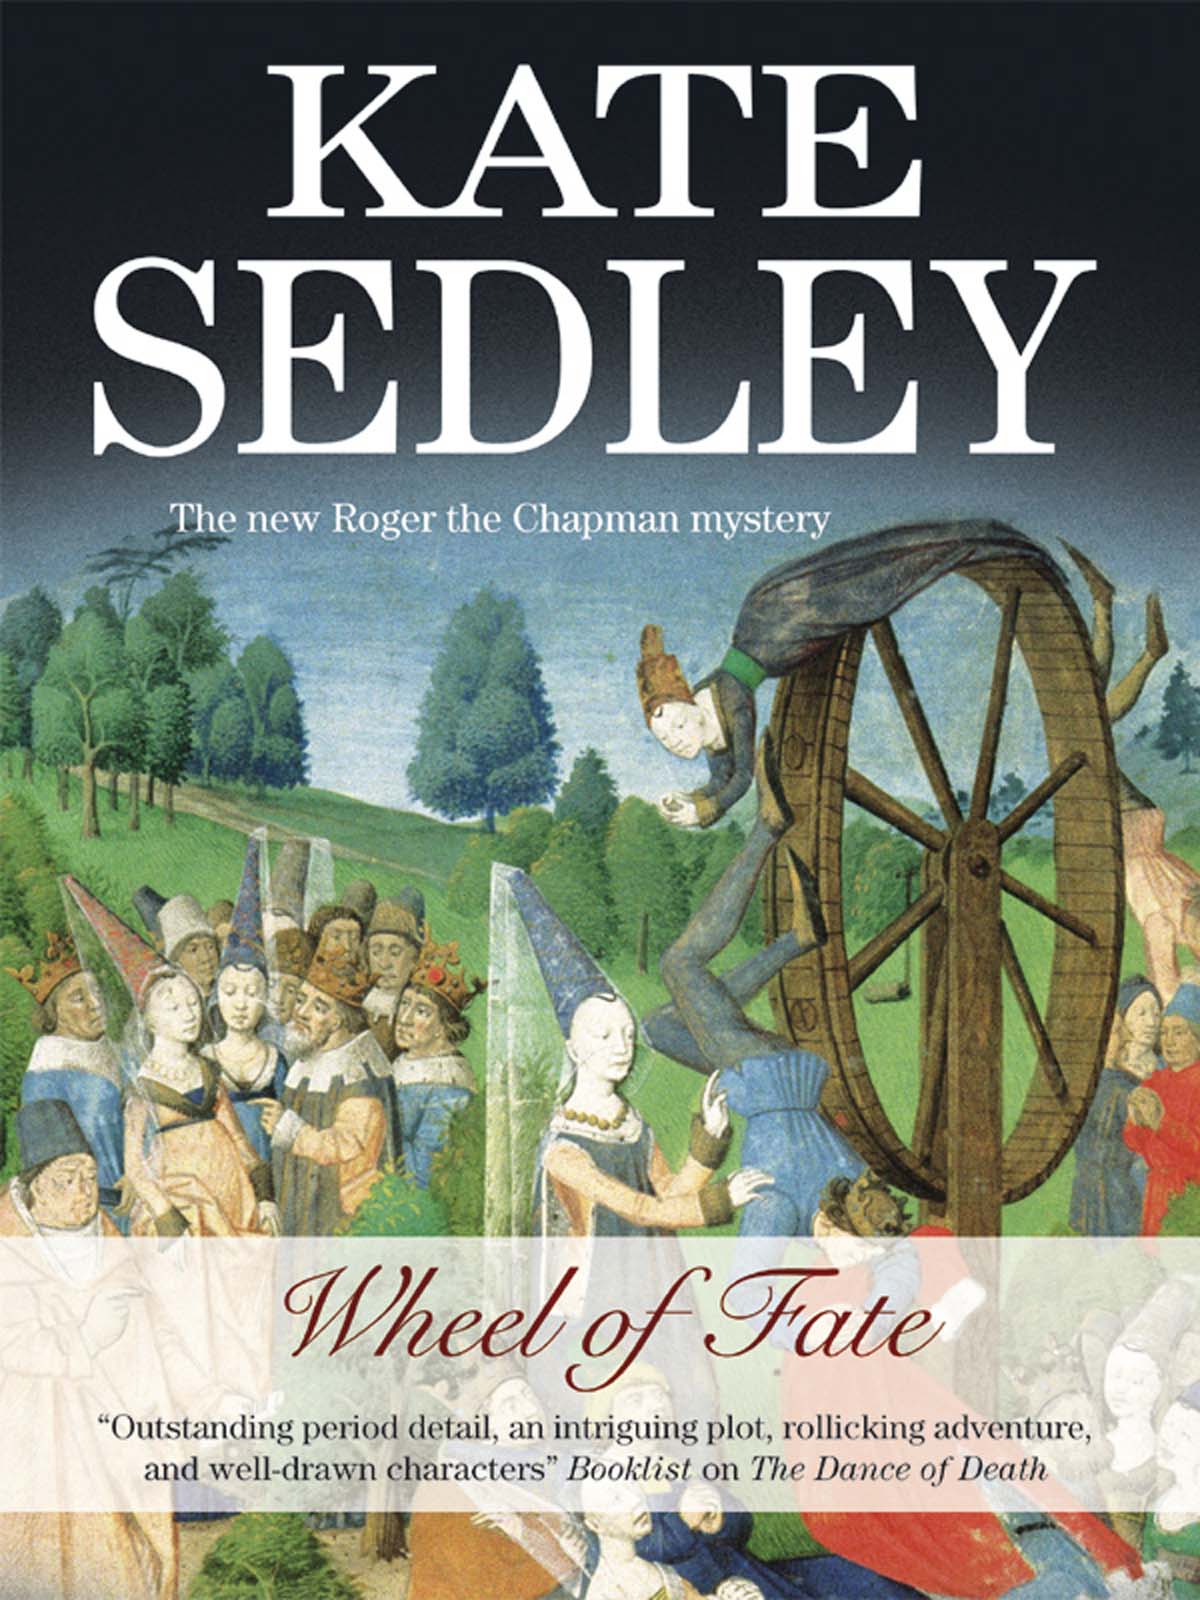 Wheel of Fate (2010) by Kate Sedley